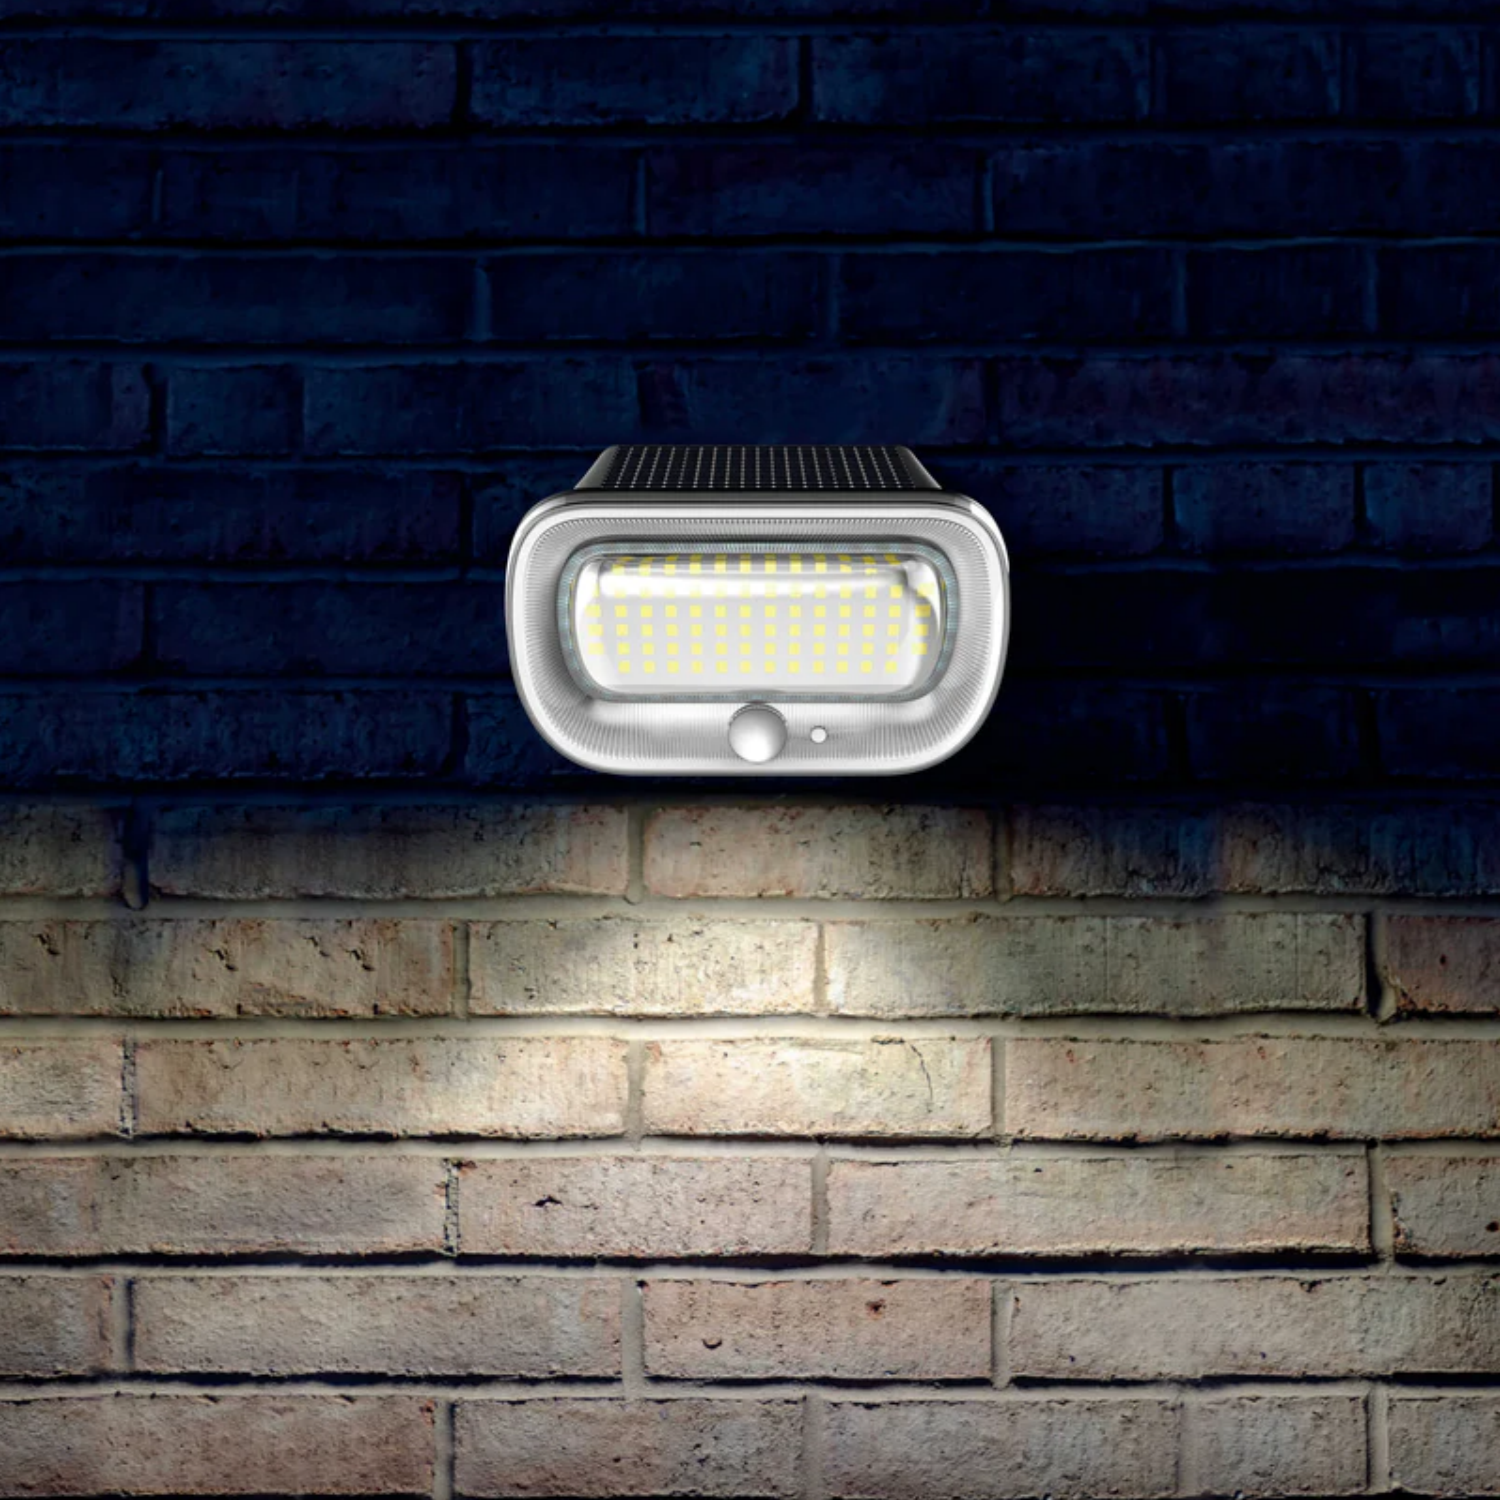 Outlux Solar Wall Lights- T092